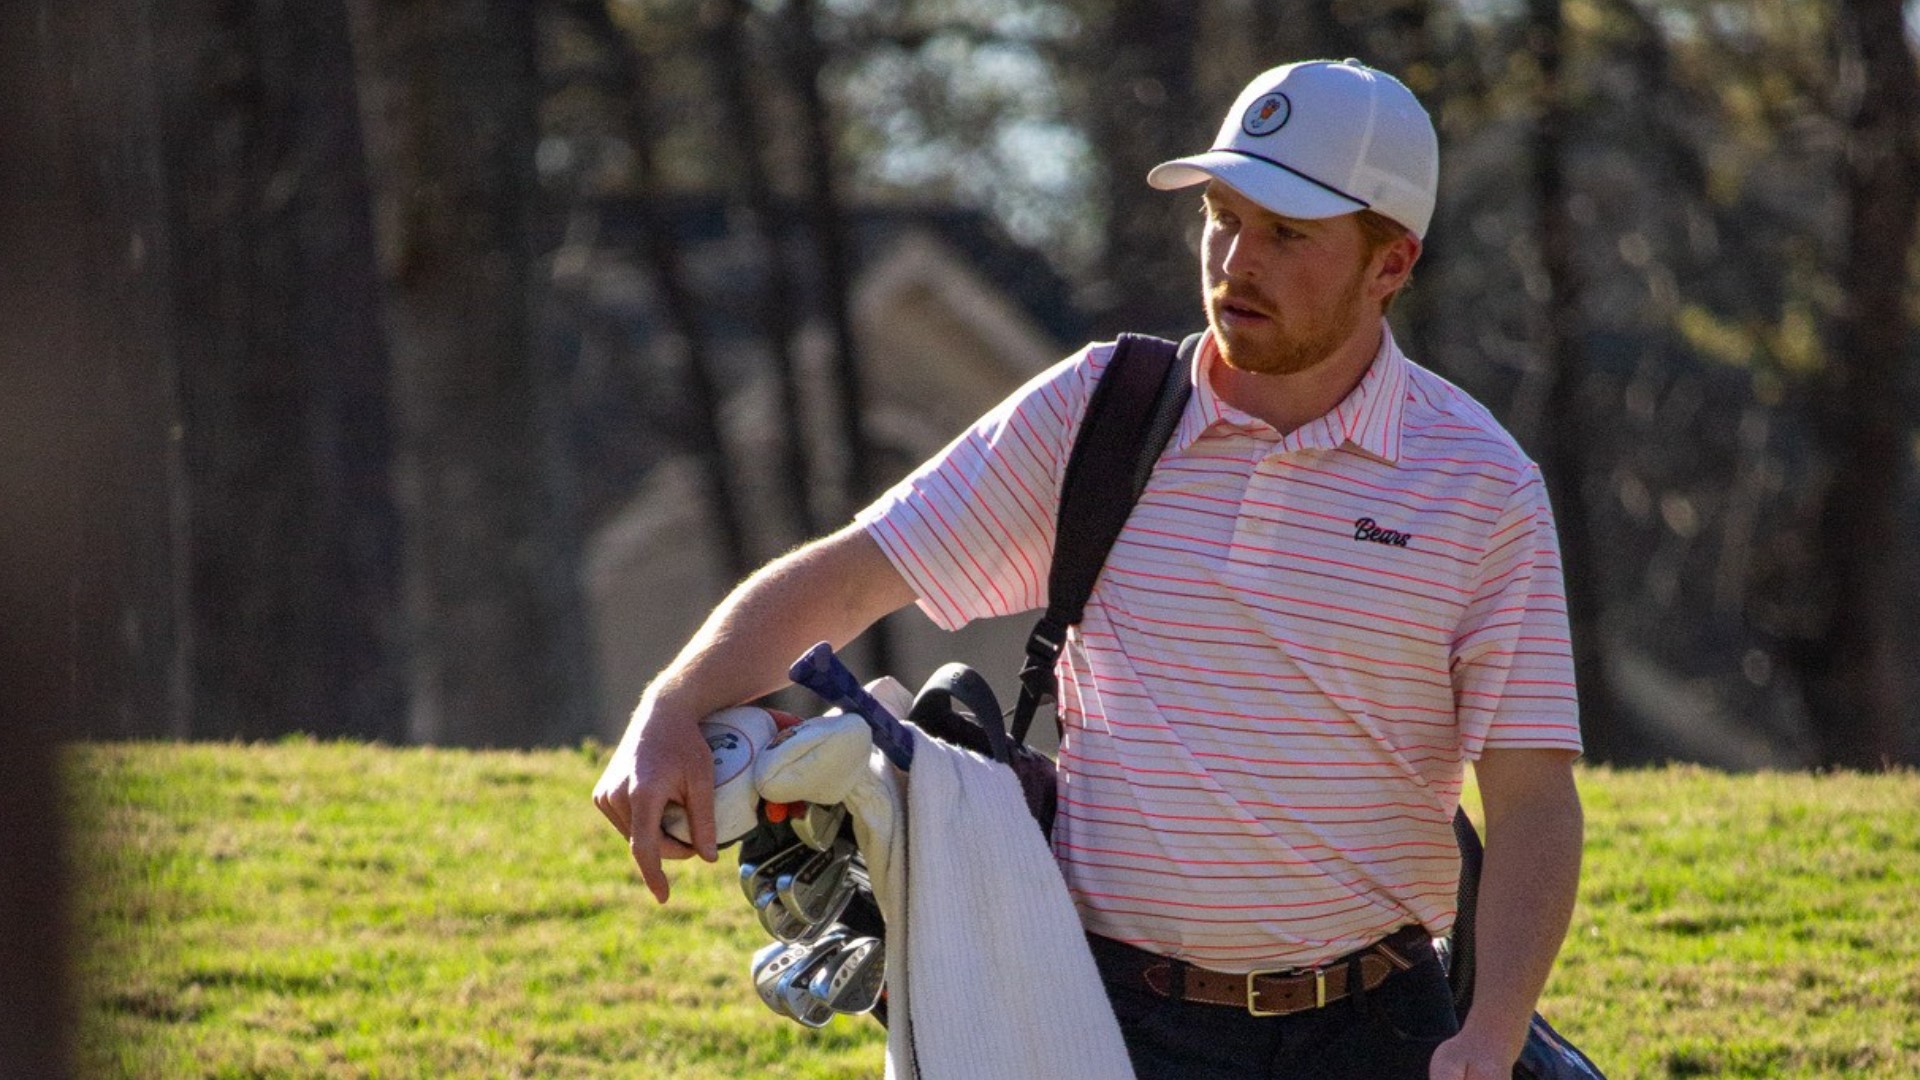 With a win at the Augusta Haskins Award Invitational, Jonsson receives an exemption into the 3M Open, becoming the first Bear to ever play in a PGA Tour event.